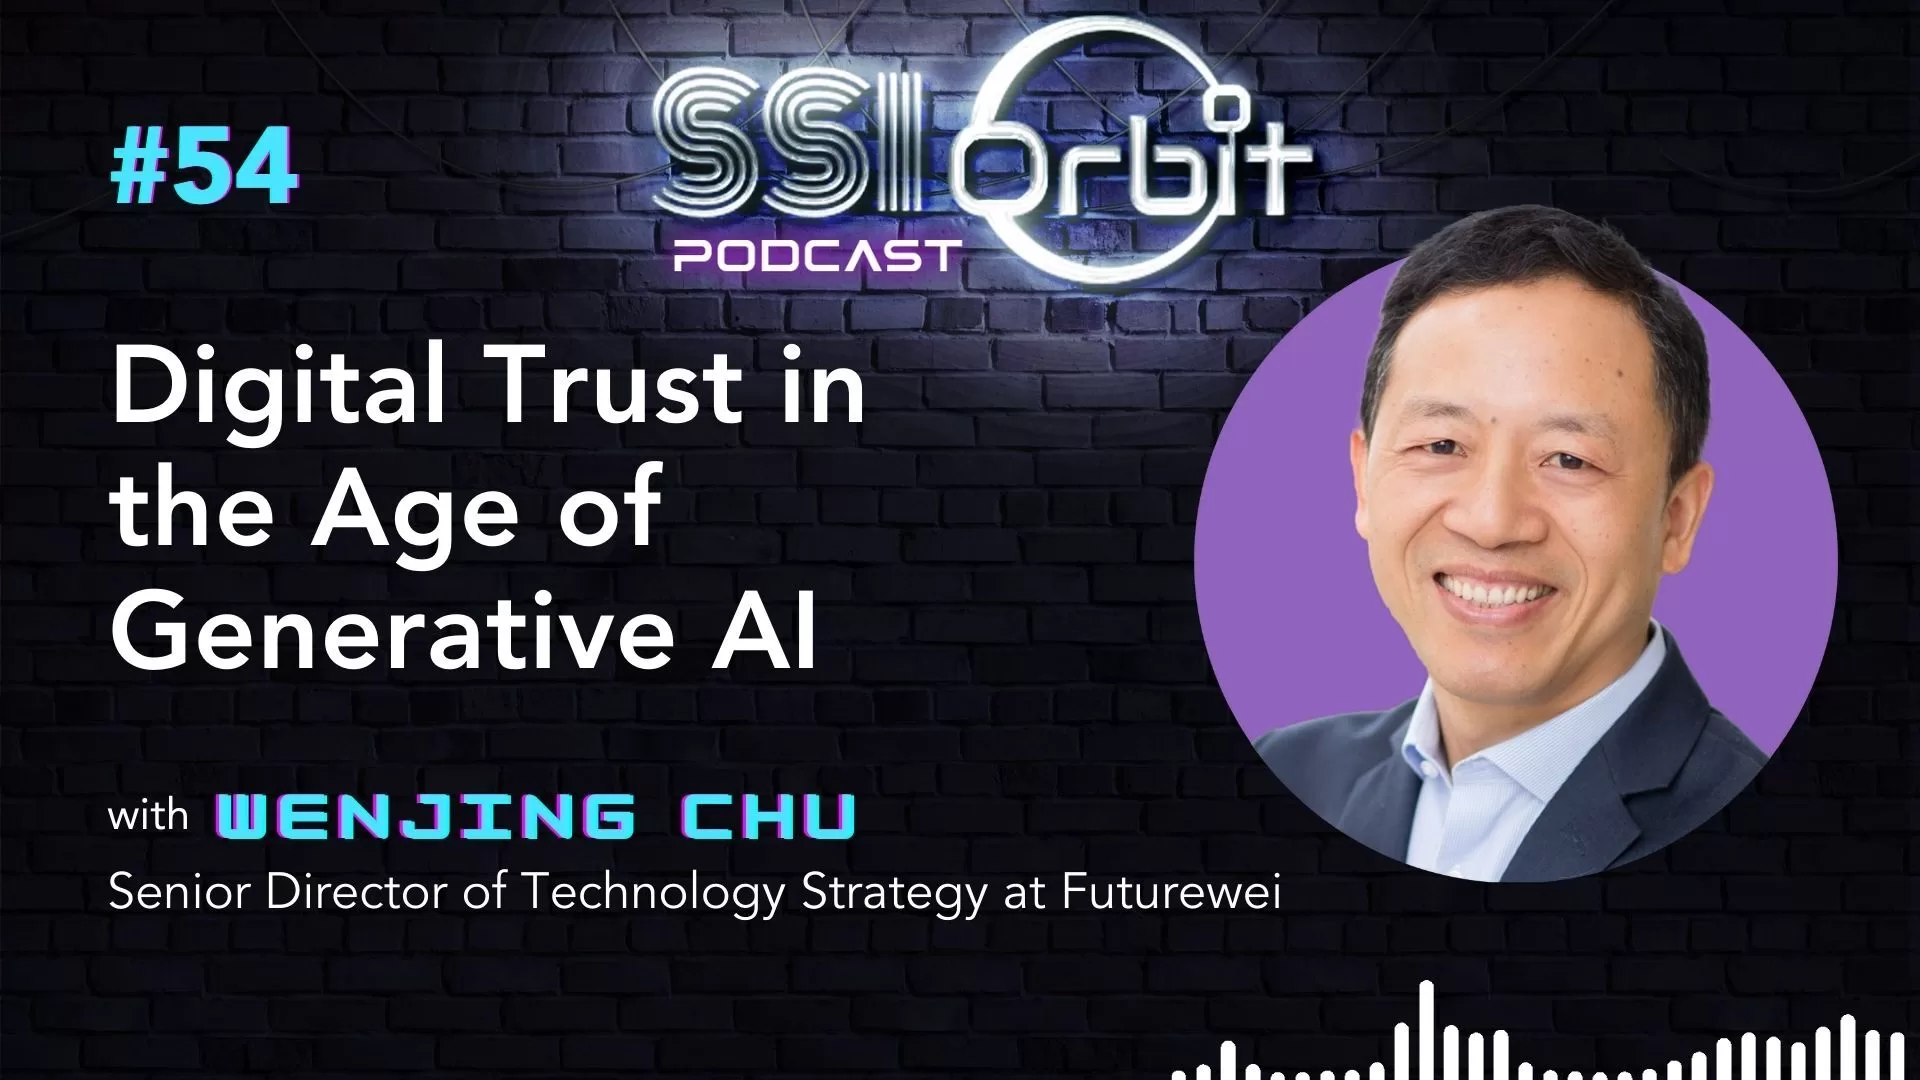 Digital Trust in the Age of Generative AI (with Wenjing Chu)